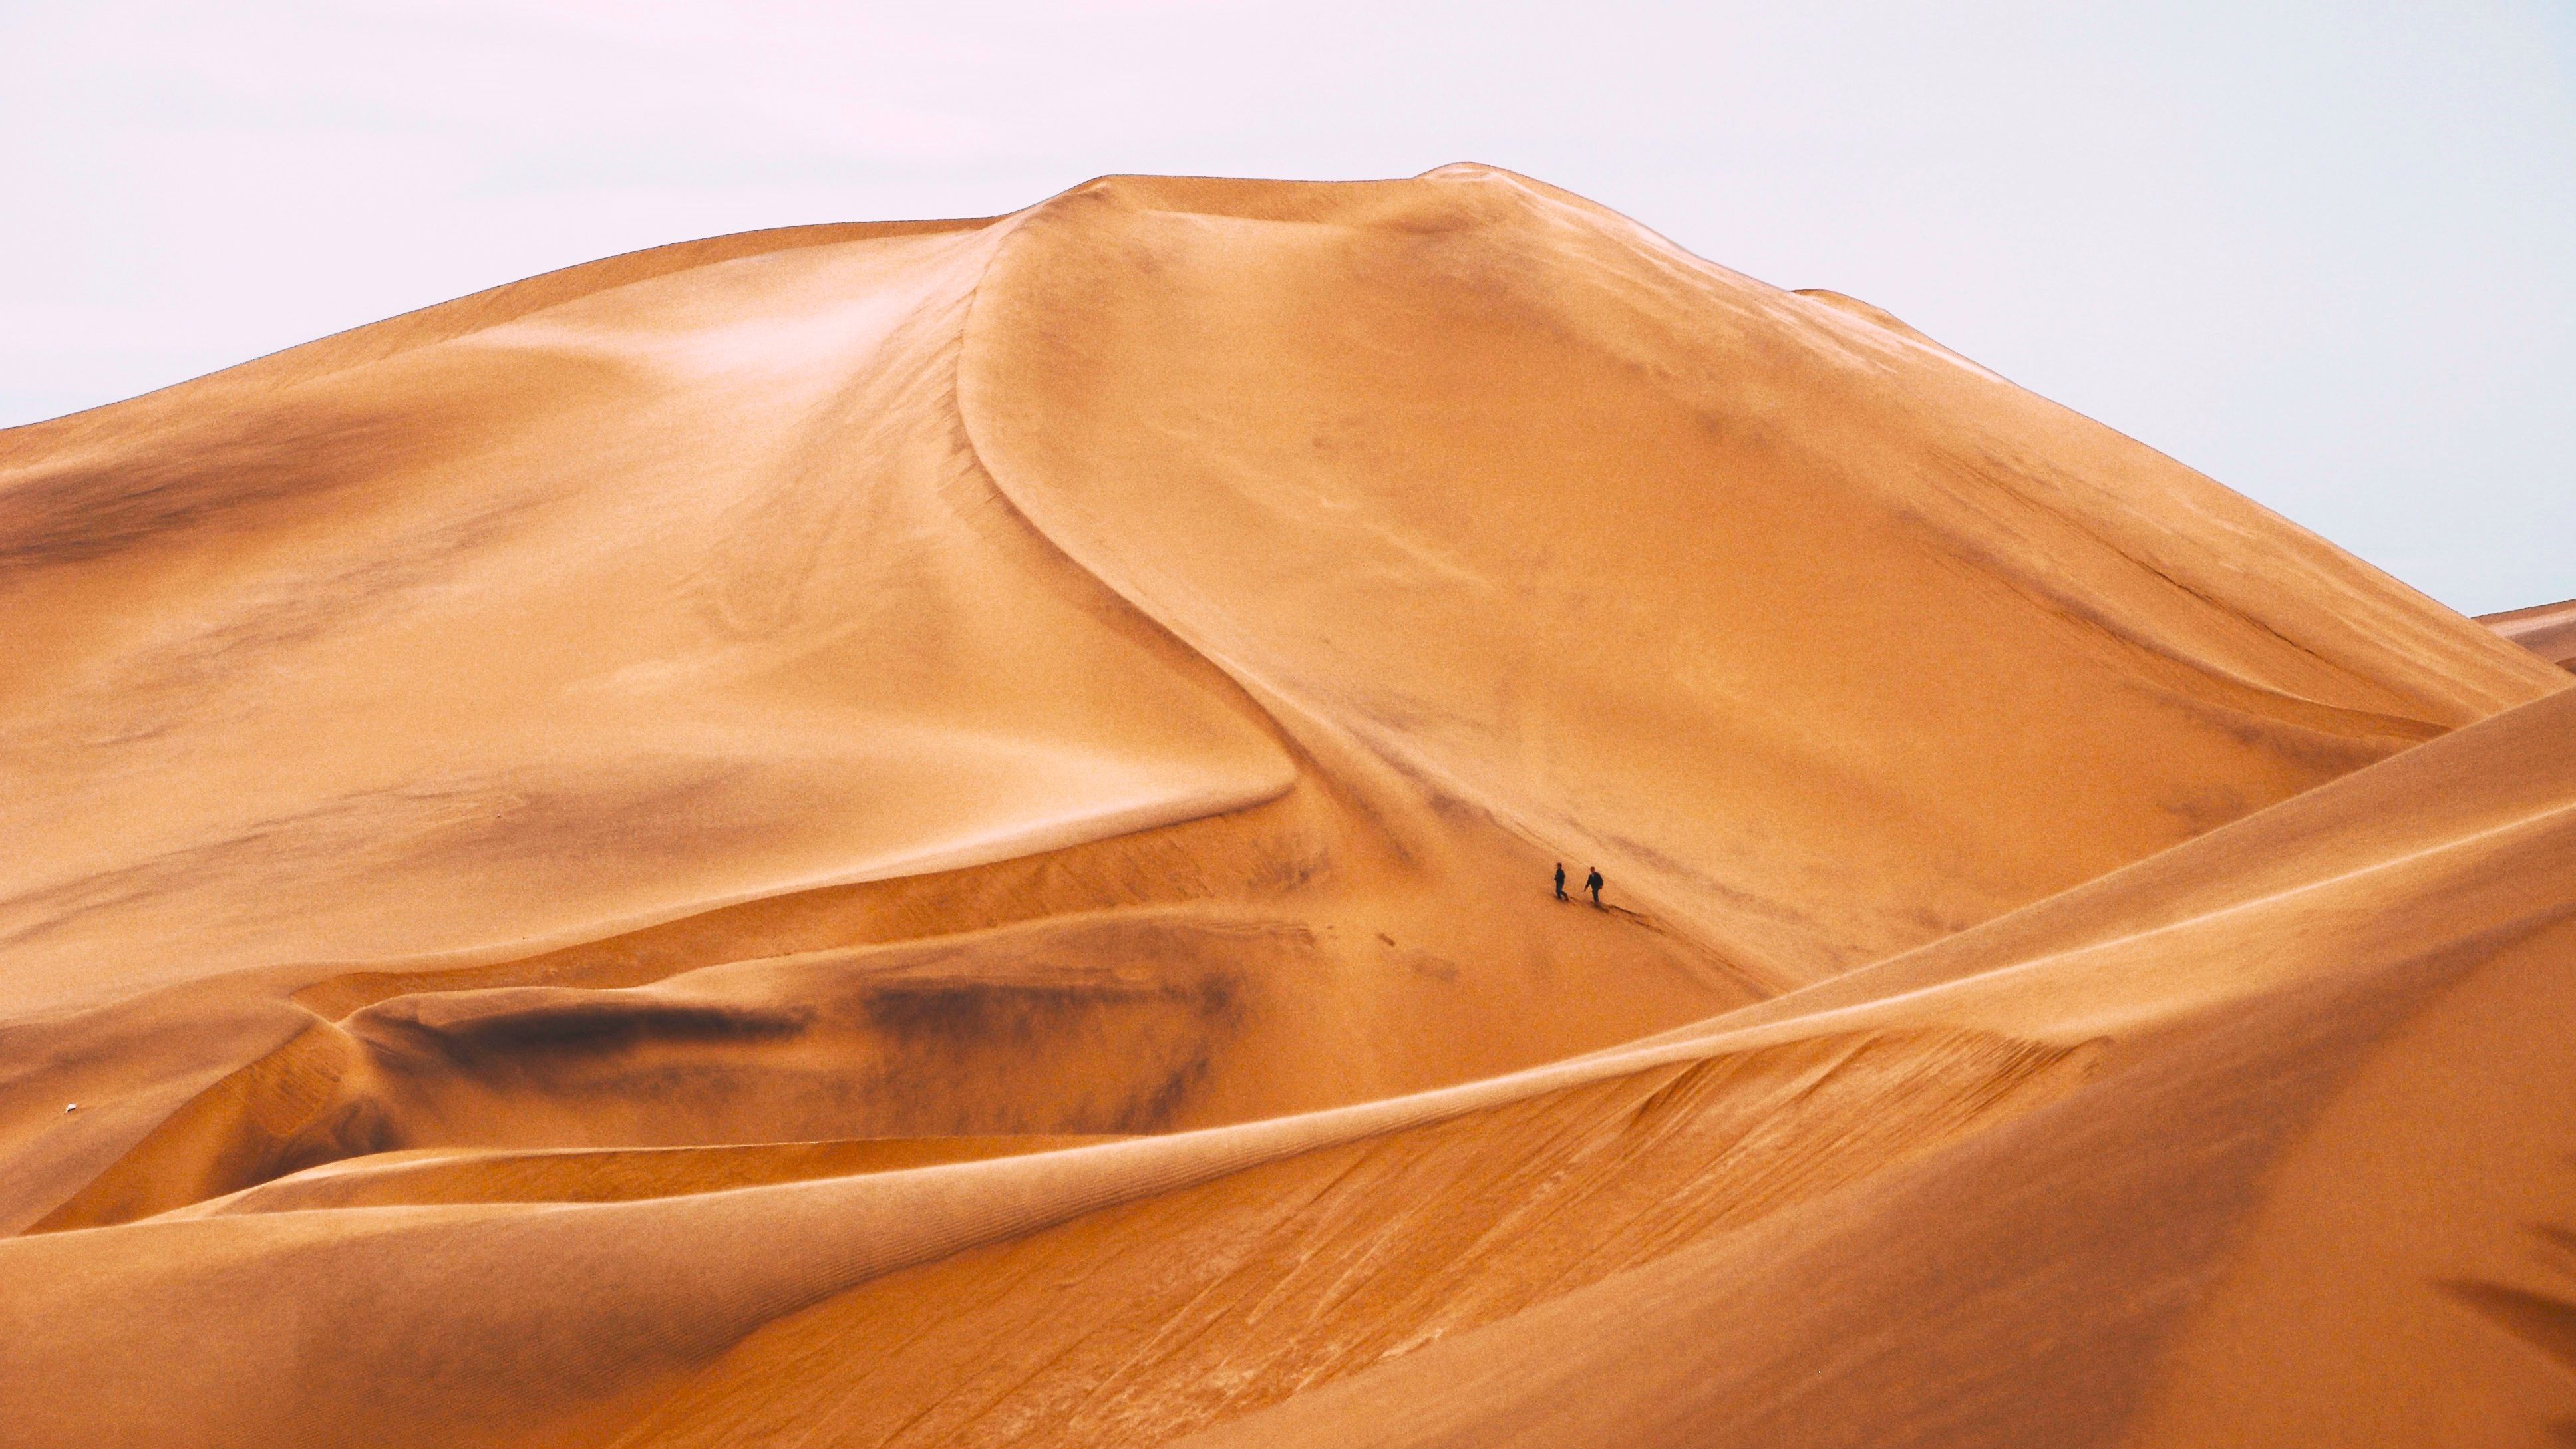 The tallest sand dunes on Earth